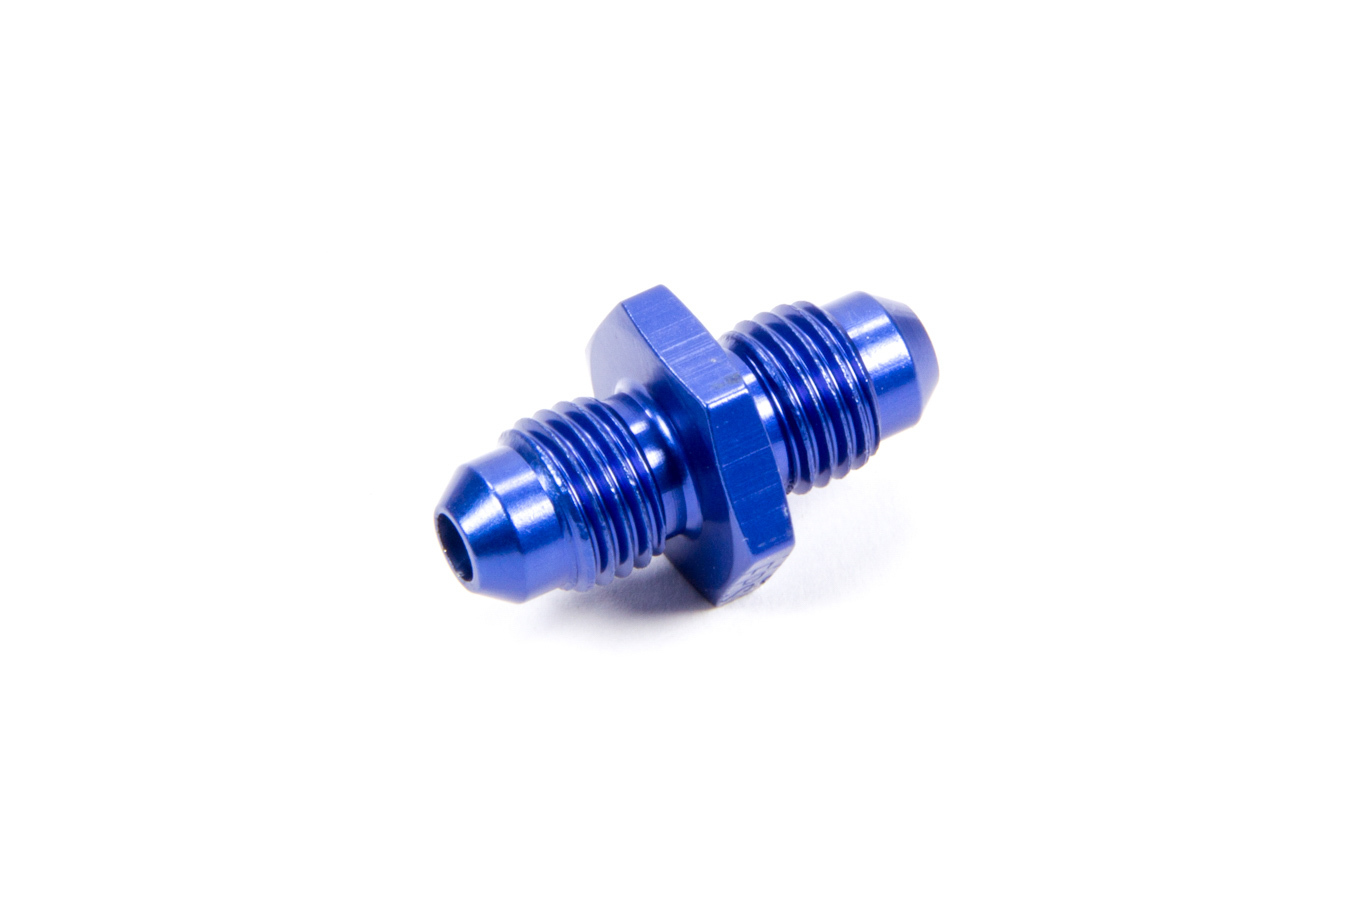 Fragola 481504 Fitting, Adapter, Straight, 4 AN Male to 4 AN Male, Aluminum, Blue Anodized, Each